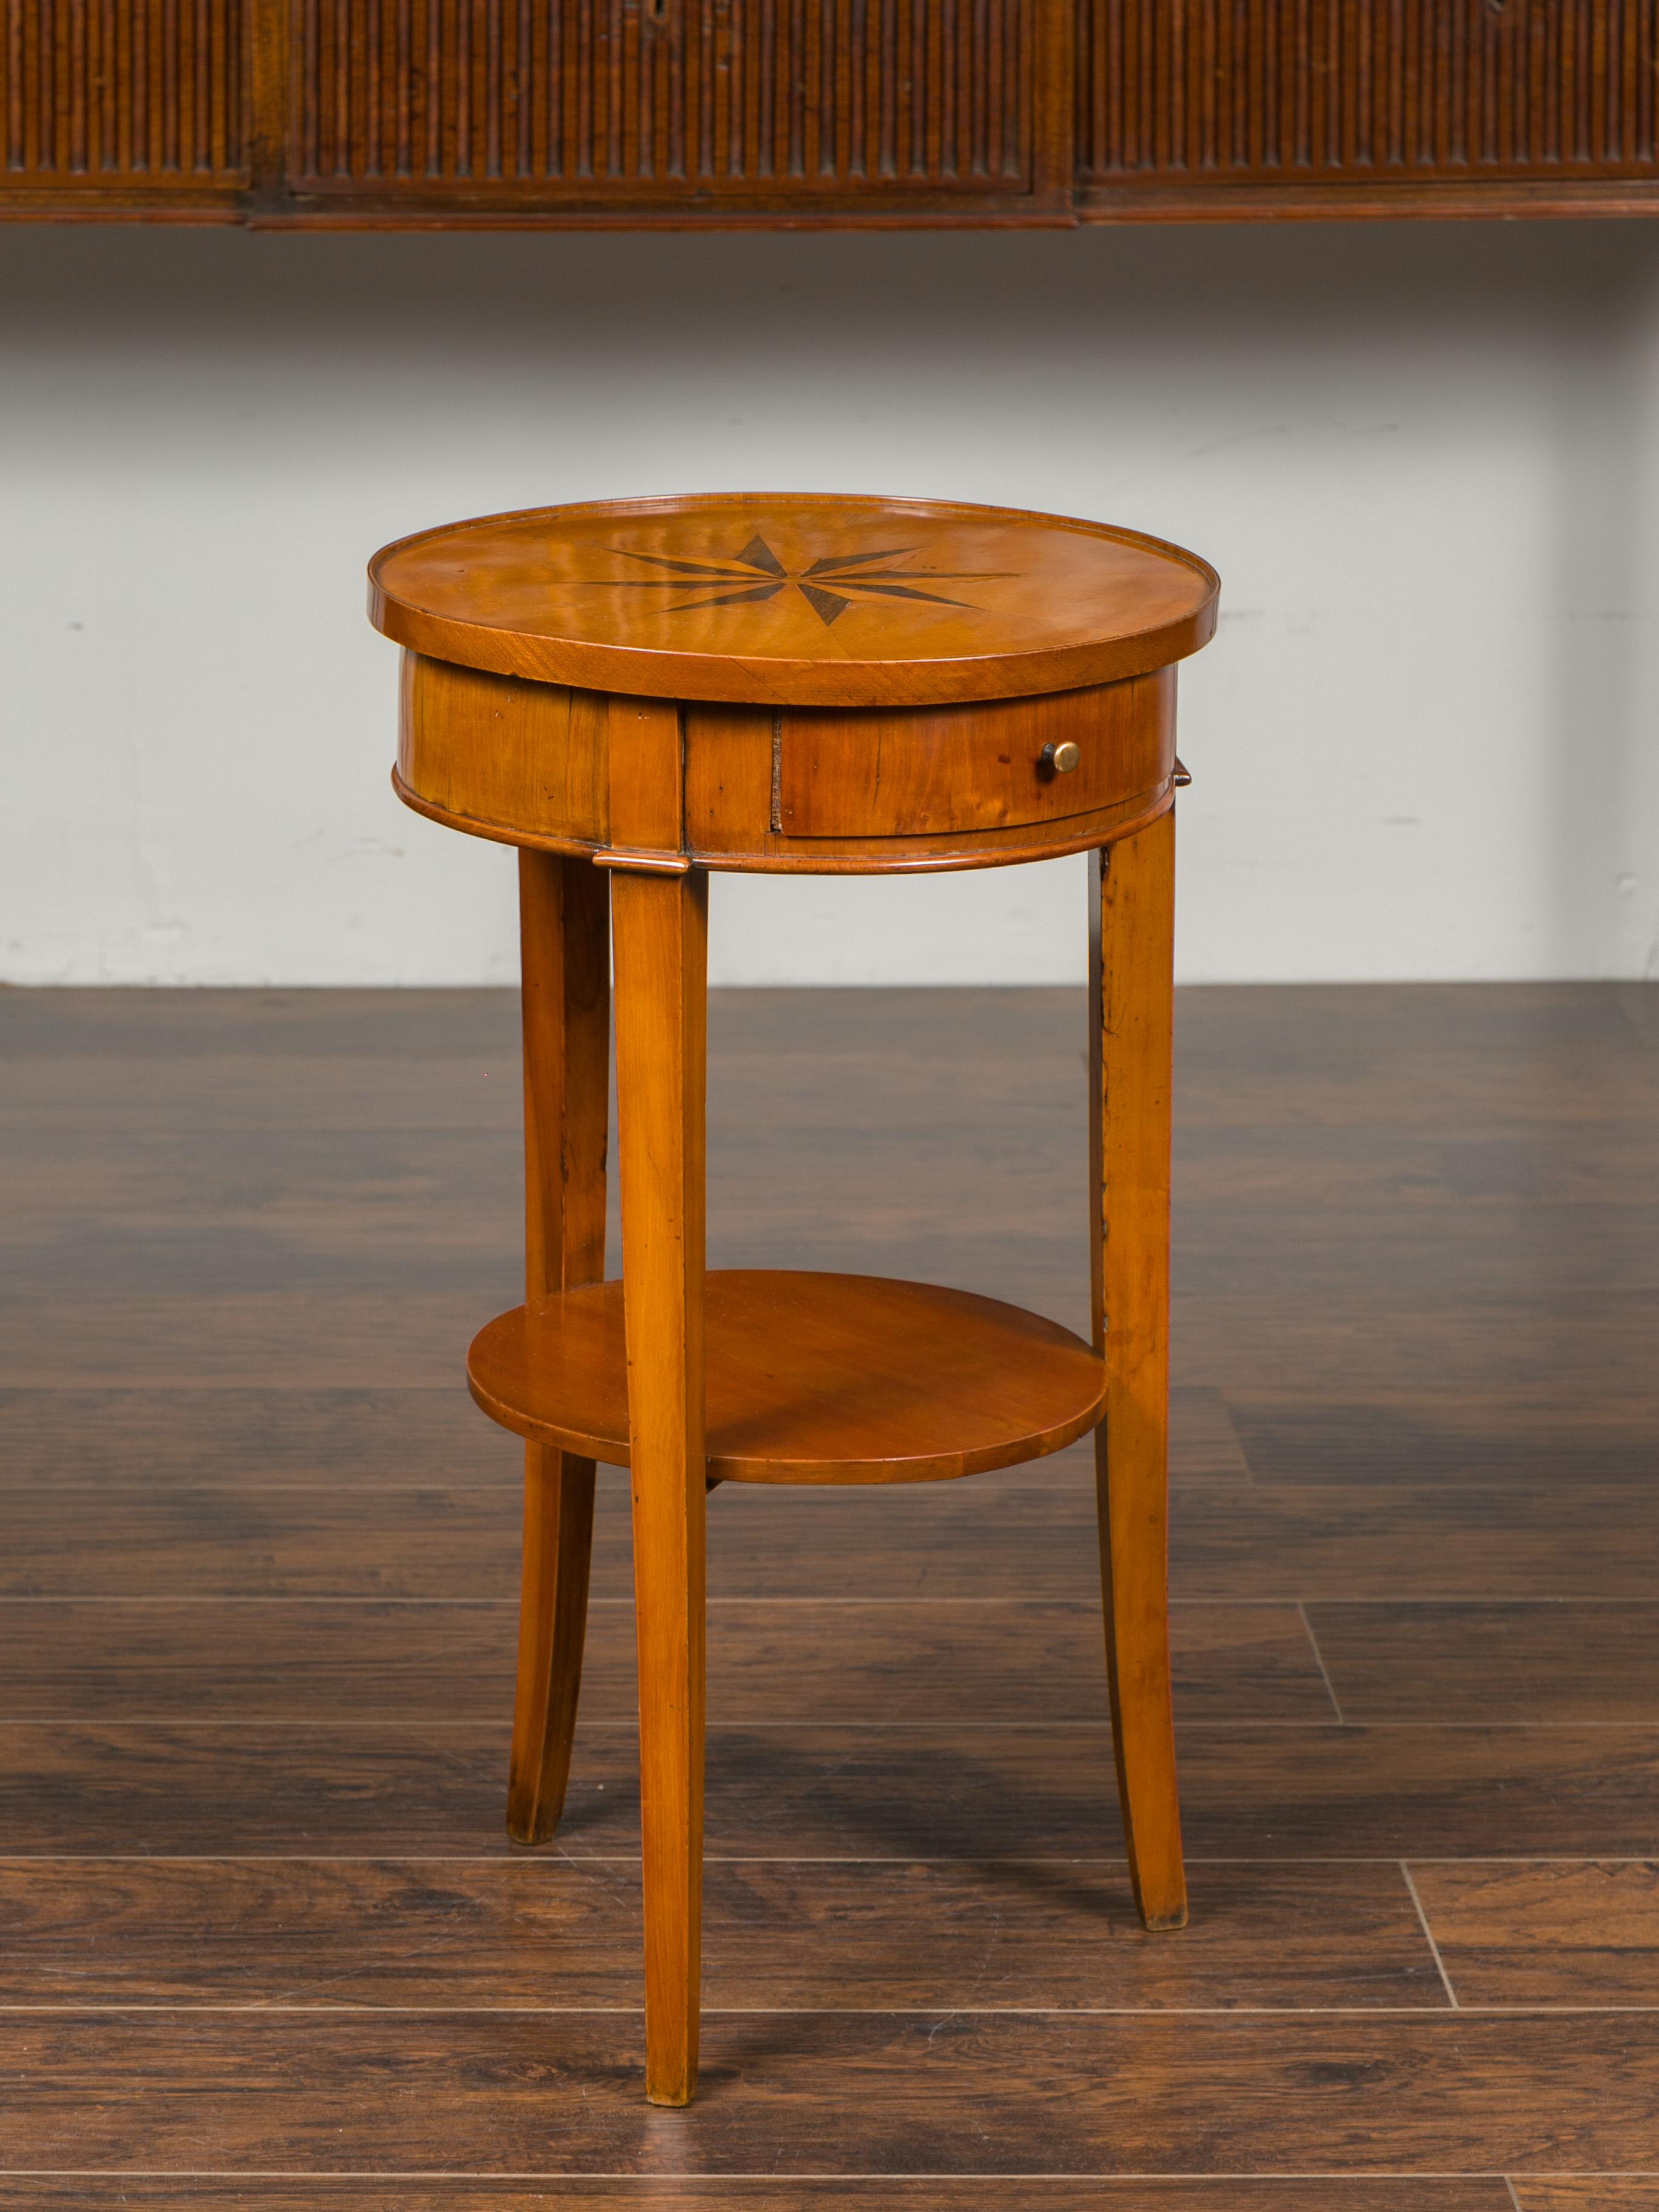 Italian 1850s Walnut Guéridon Table with Star Marquetry and Single Drawer For Sale 2